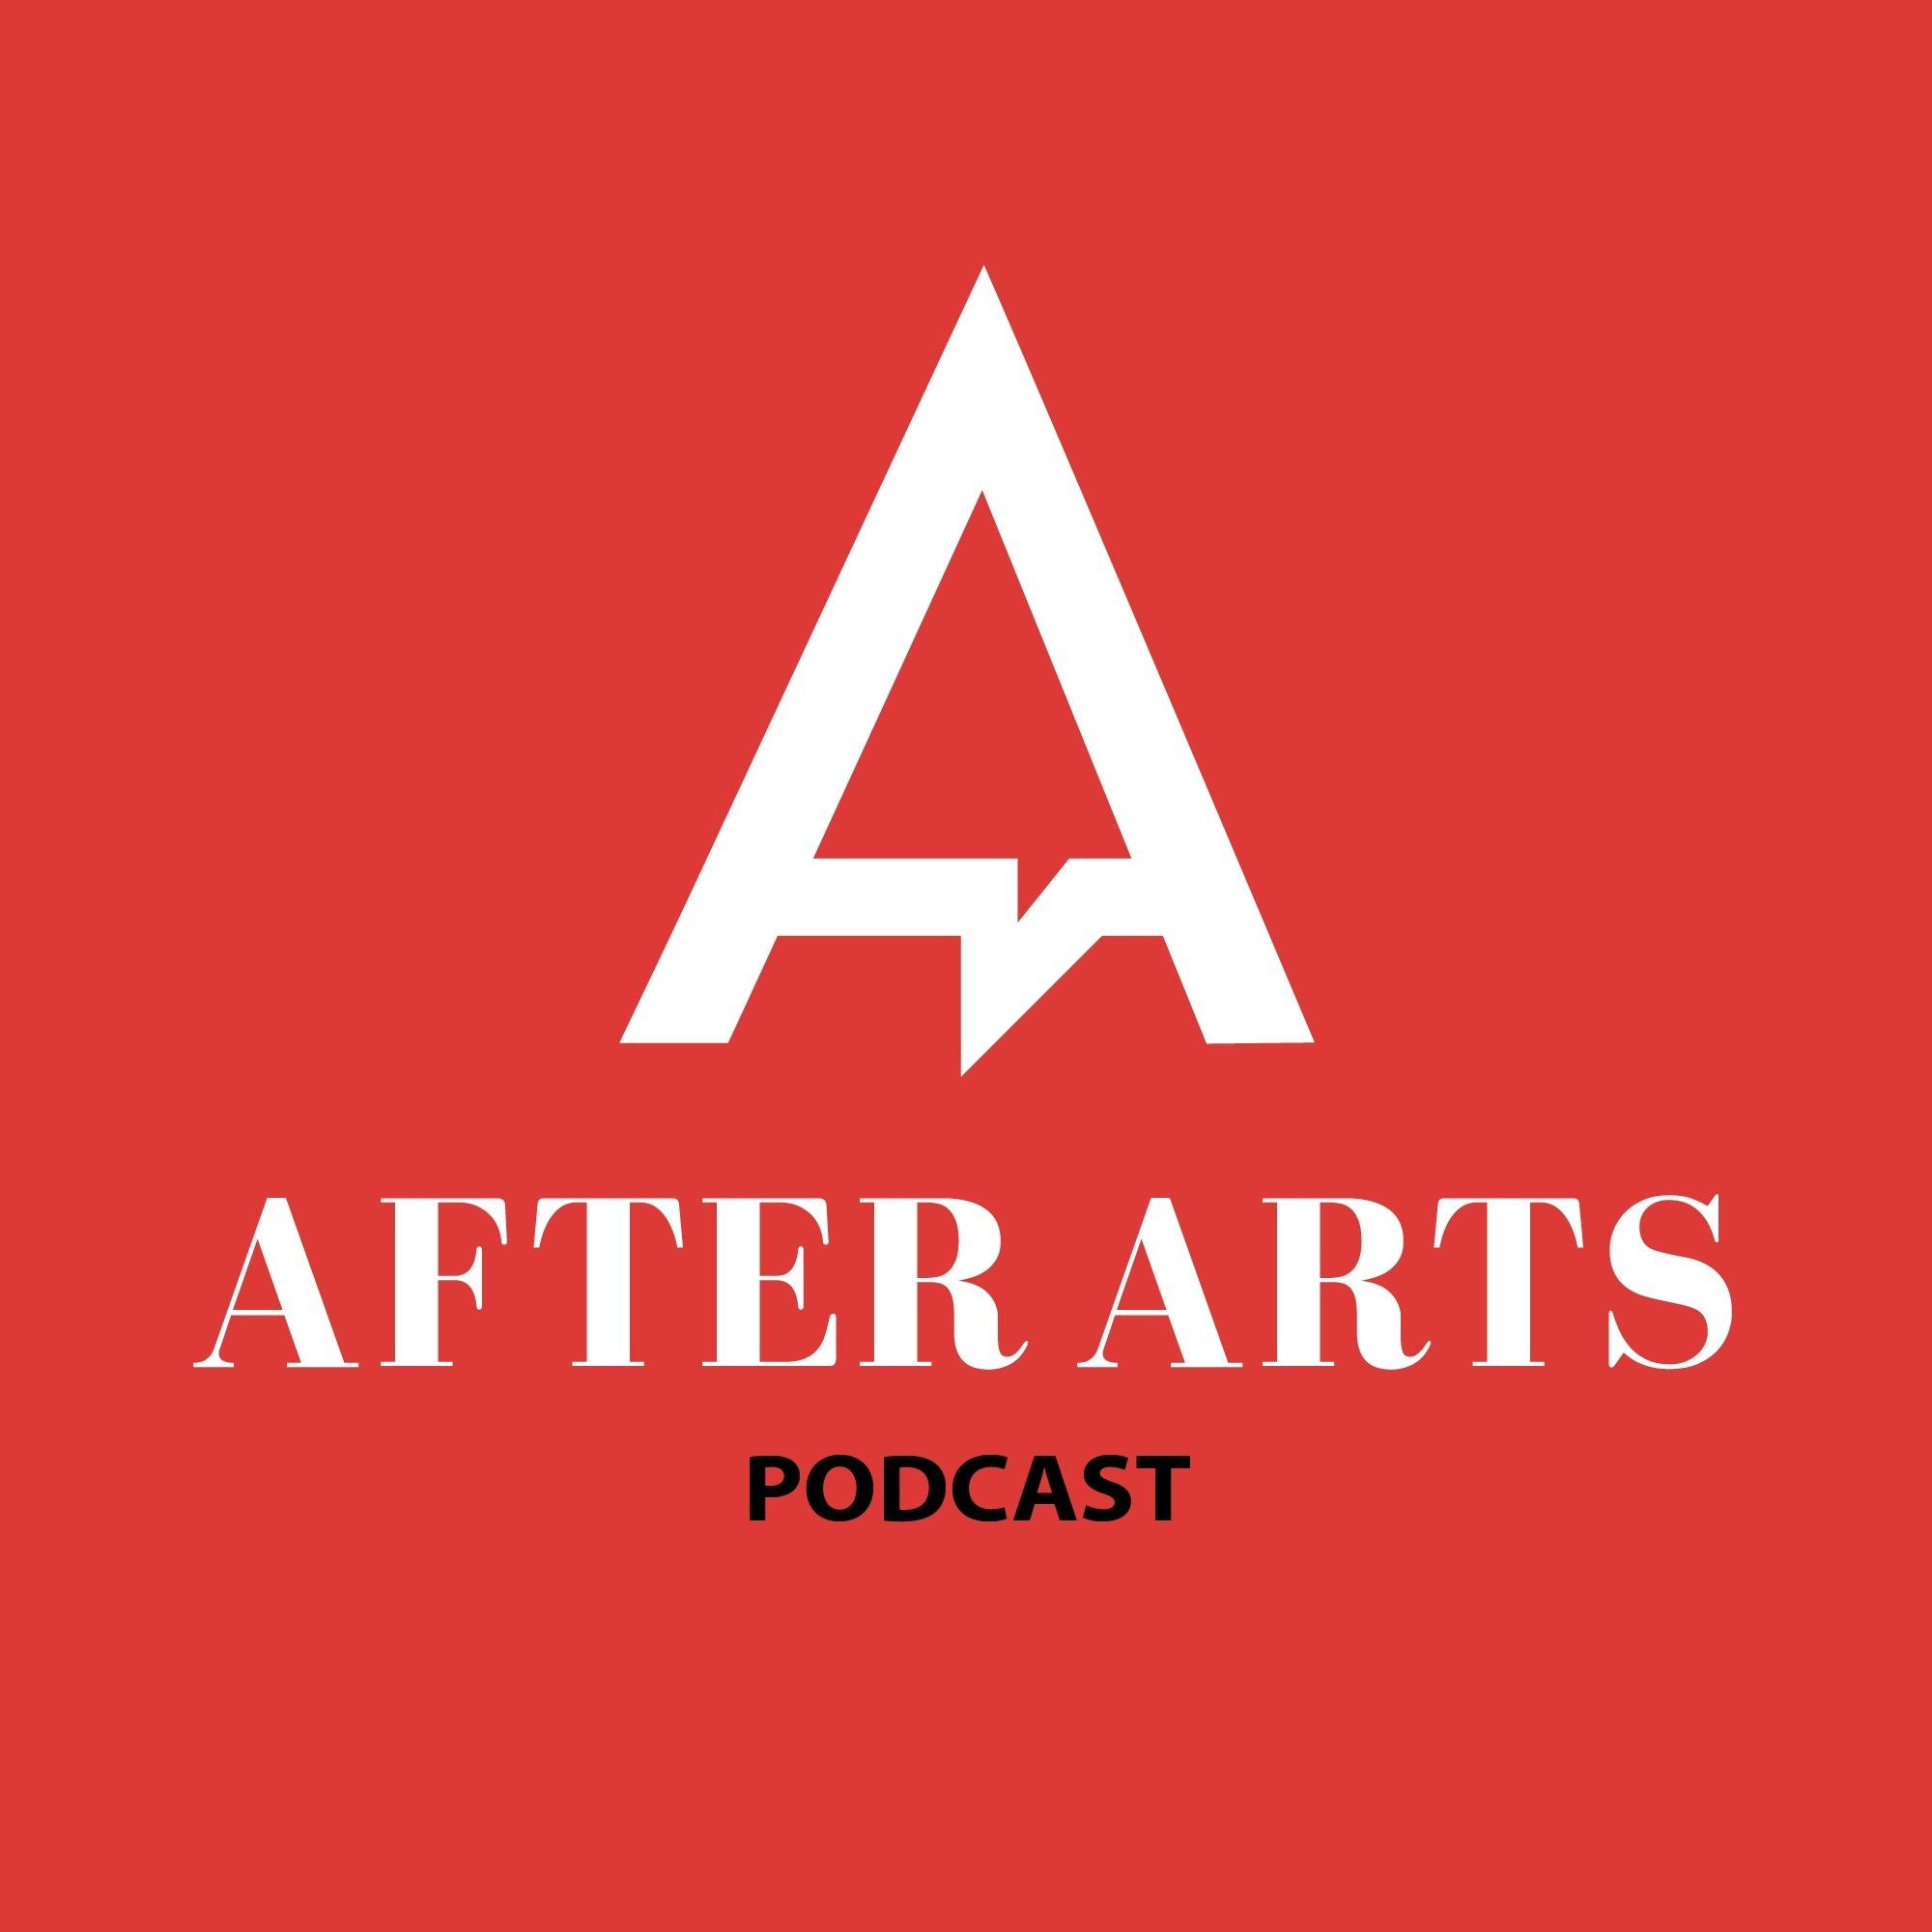 The After Arts Podcast